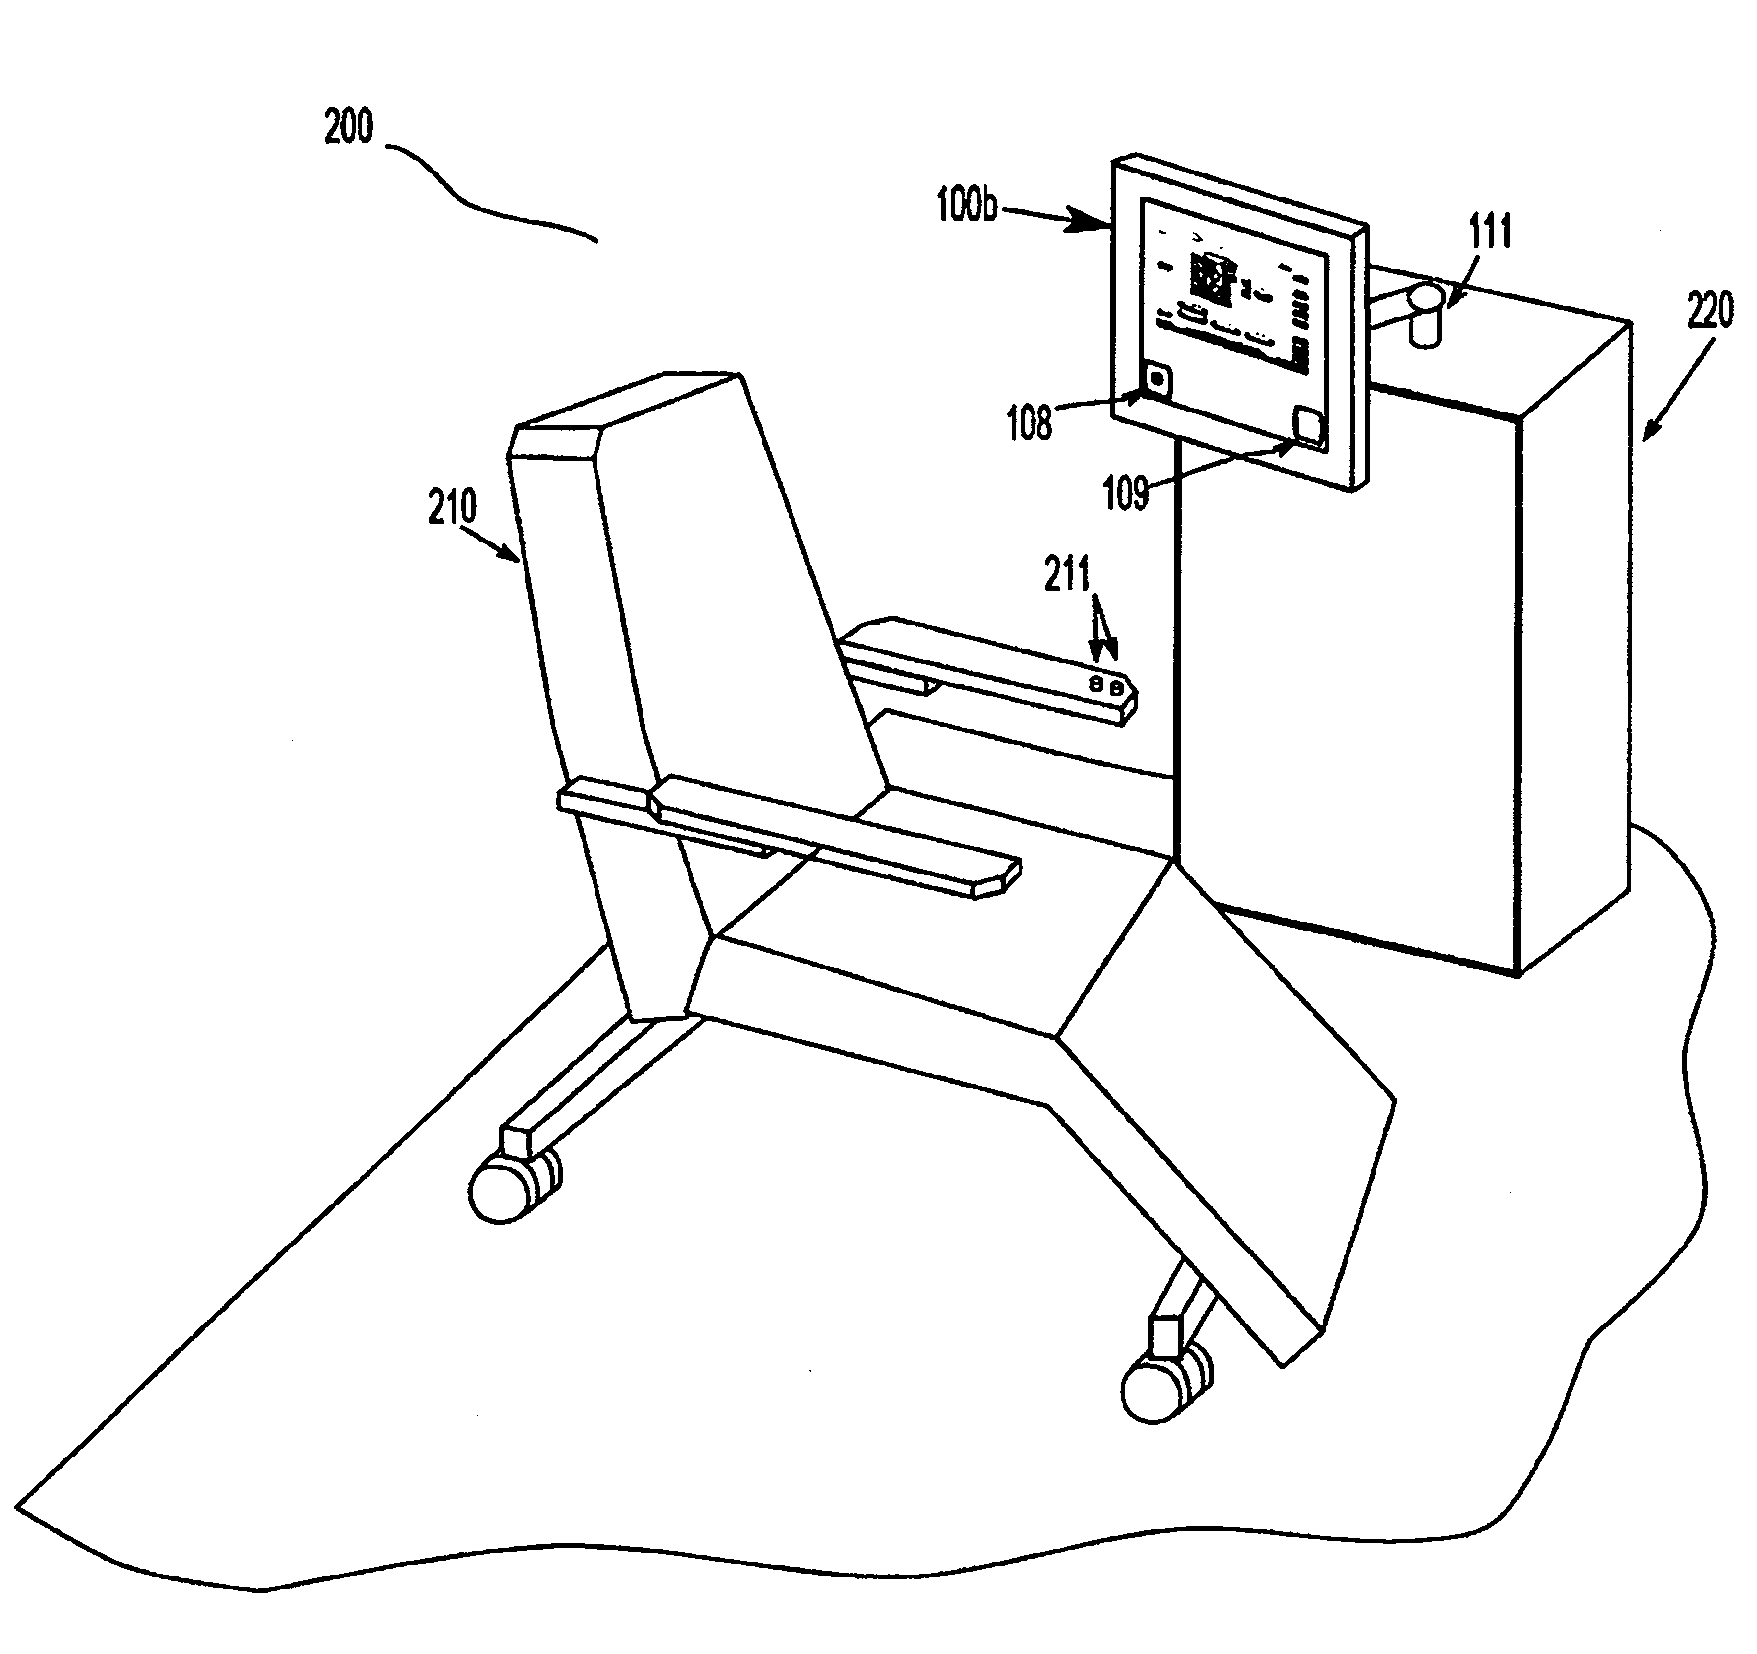 Medical device having a multi-function display